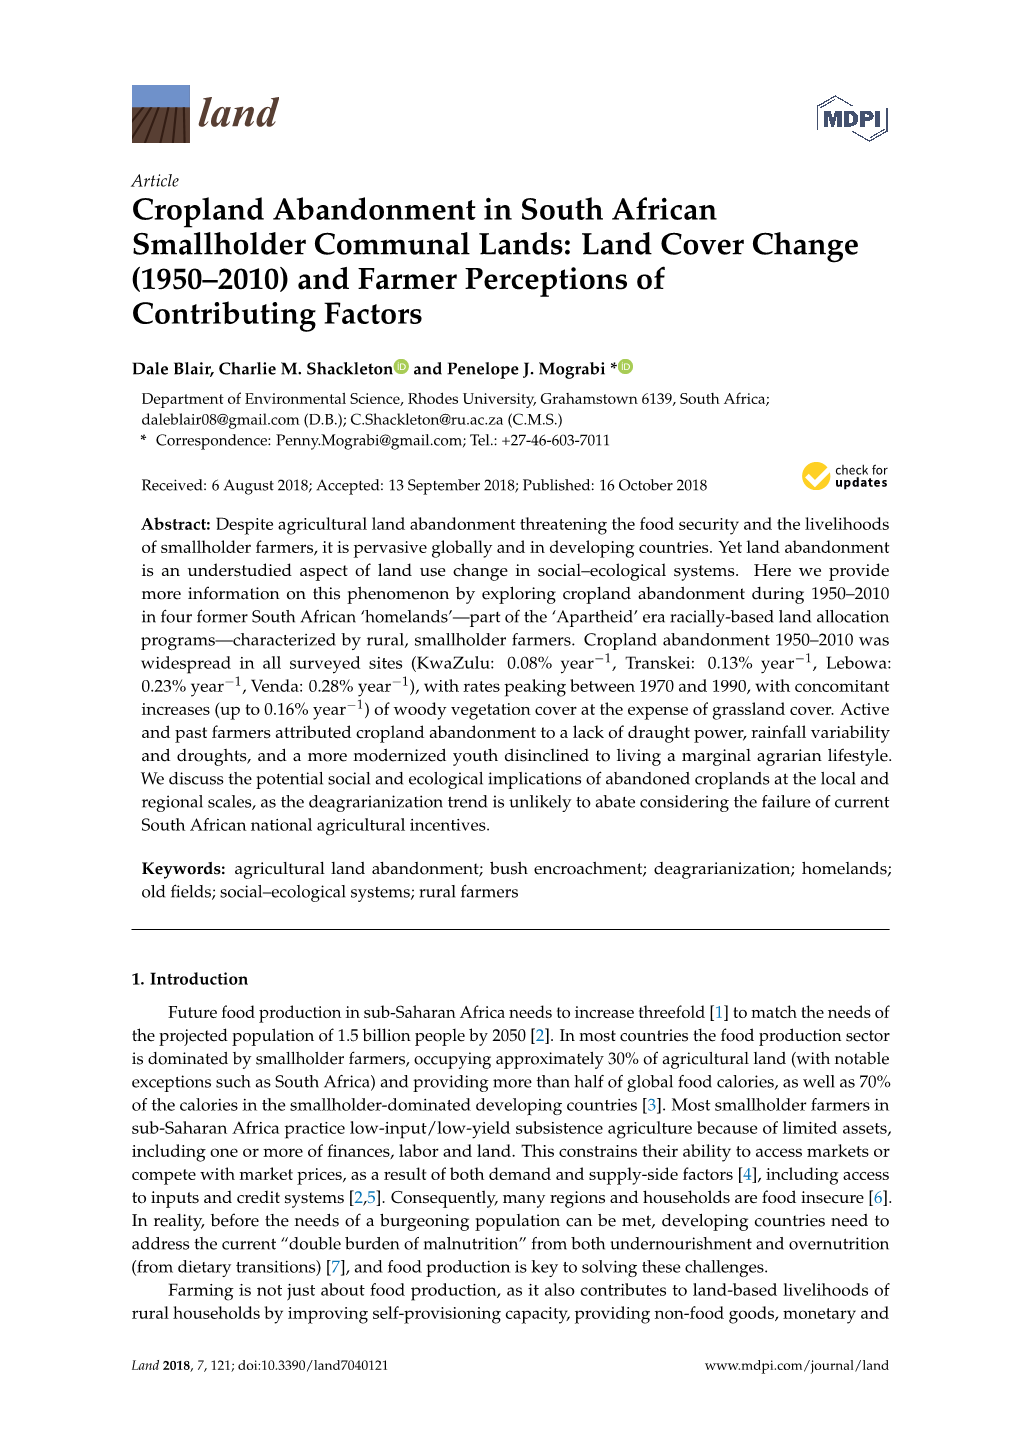 Cropland Abandonment in South African Smallholder Communal Lands: Land Cover Change (1950–2010) and Farmer Perceptions of Contributing Factors